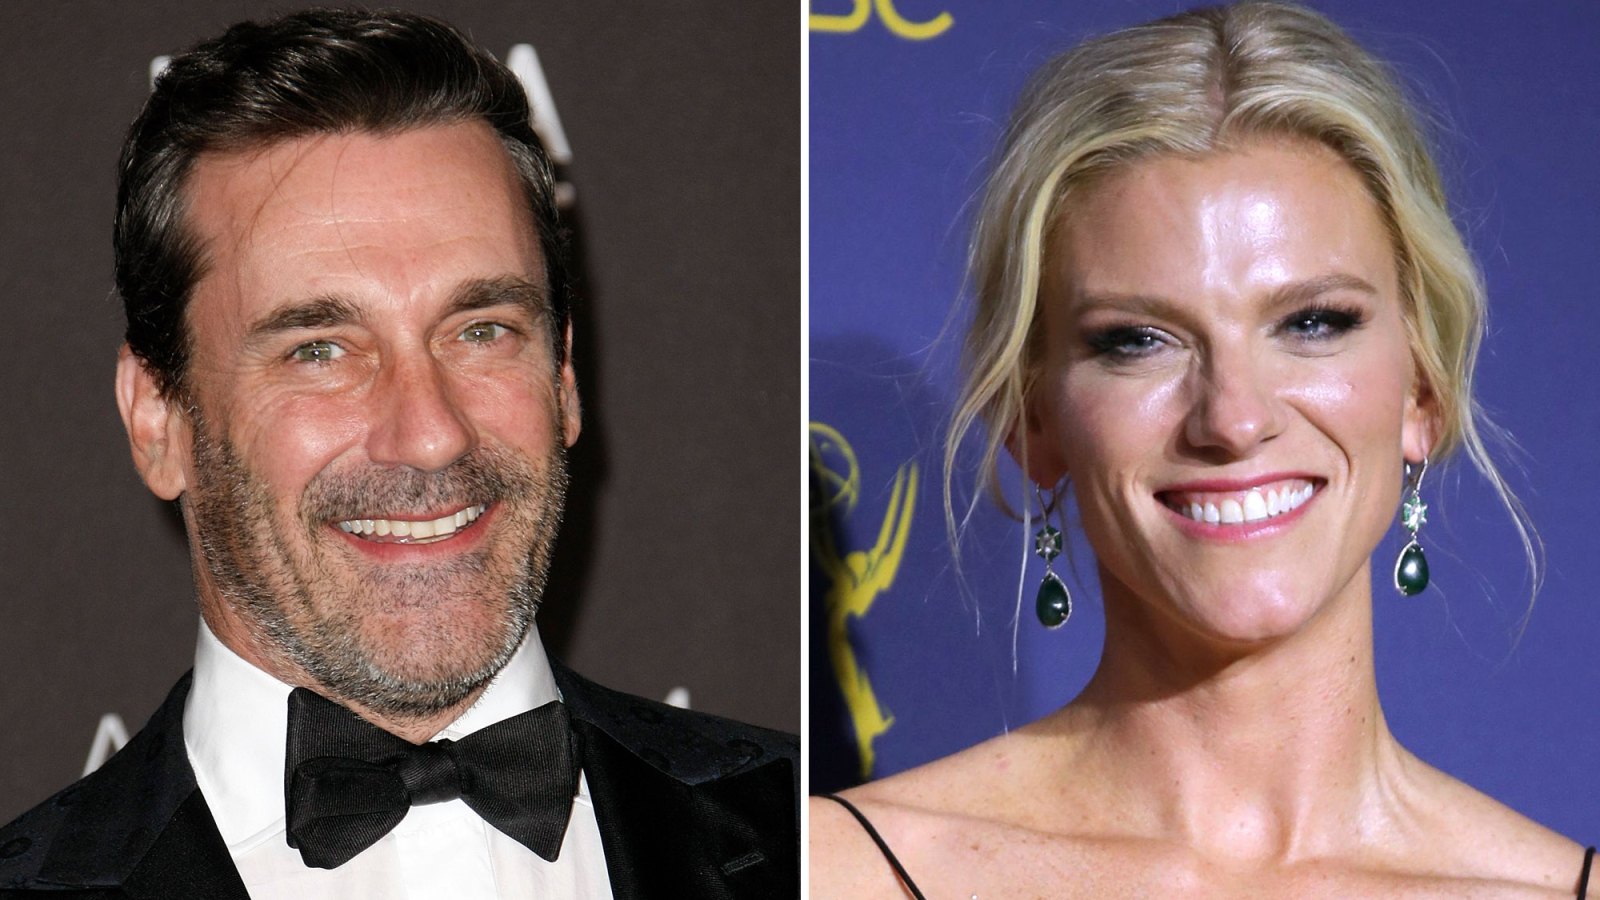 Jon Hamm and Lindsay Shookus Spotted Together Again at ‘Saturday Night Live’ Party